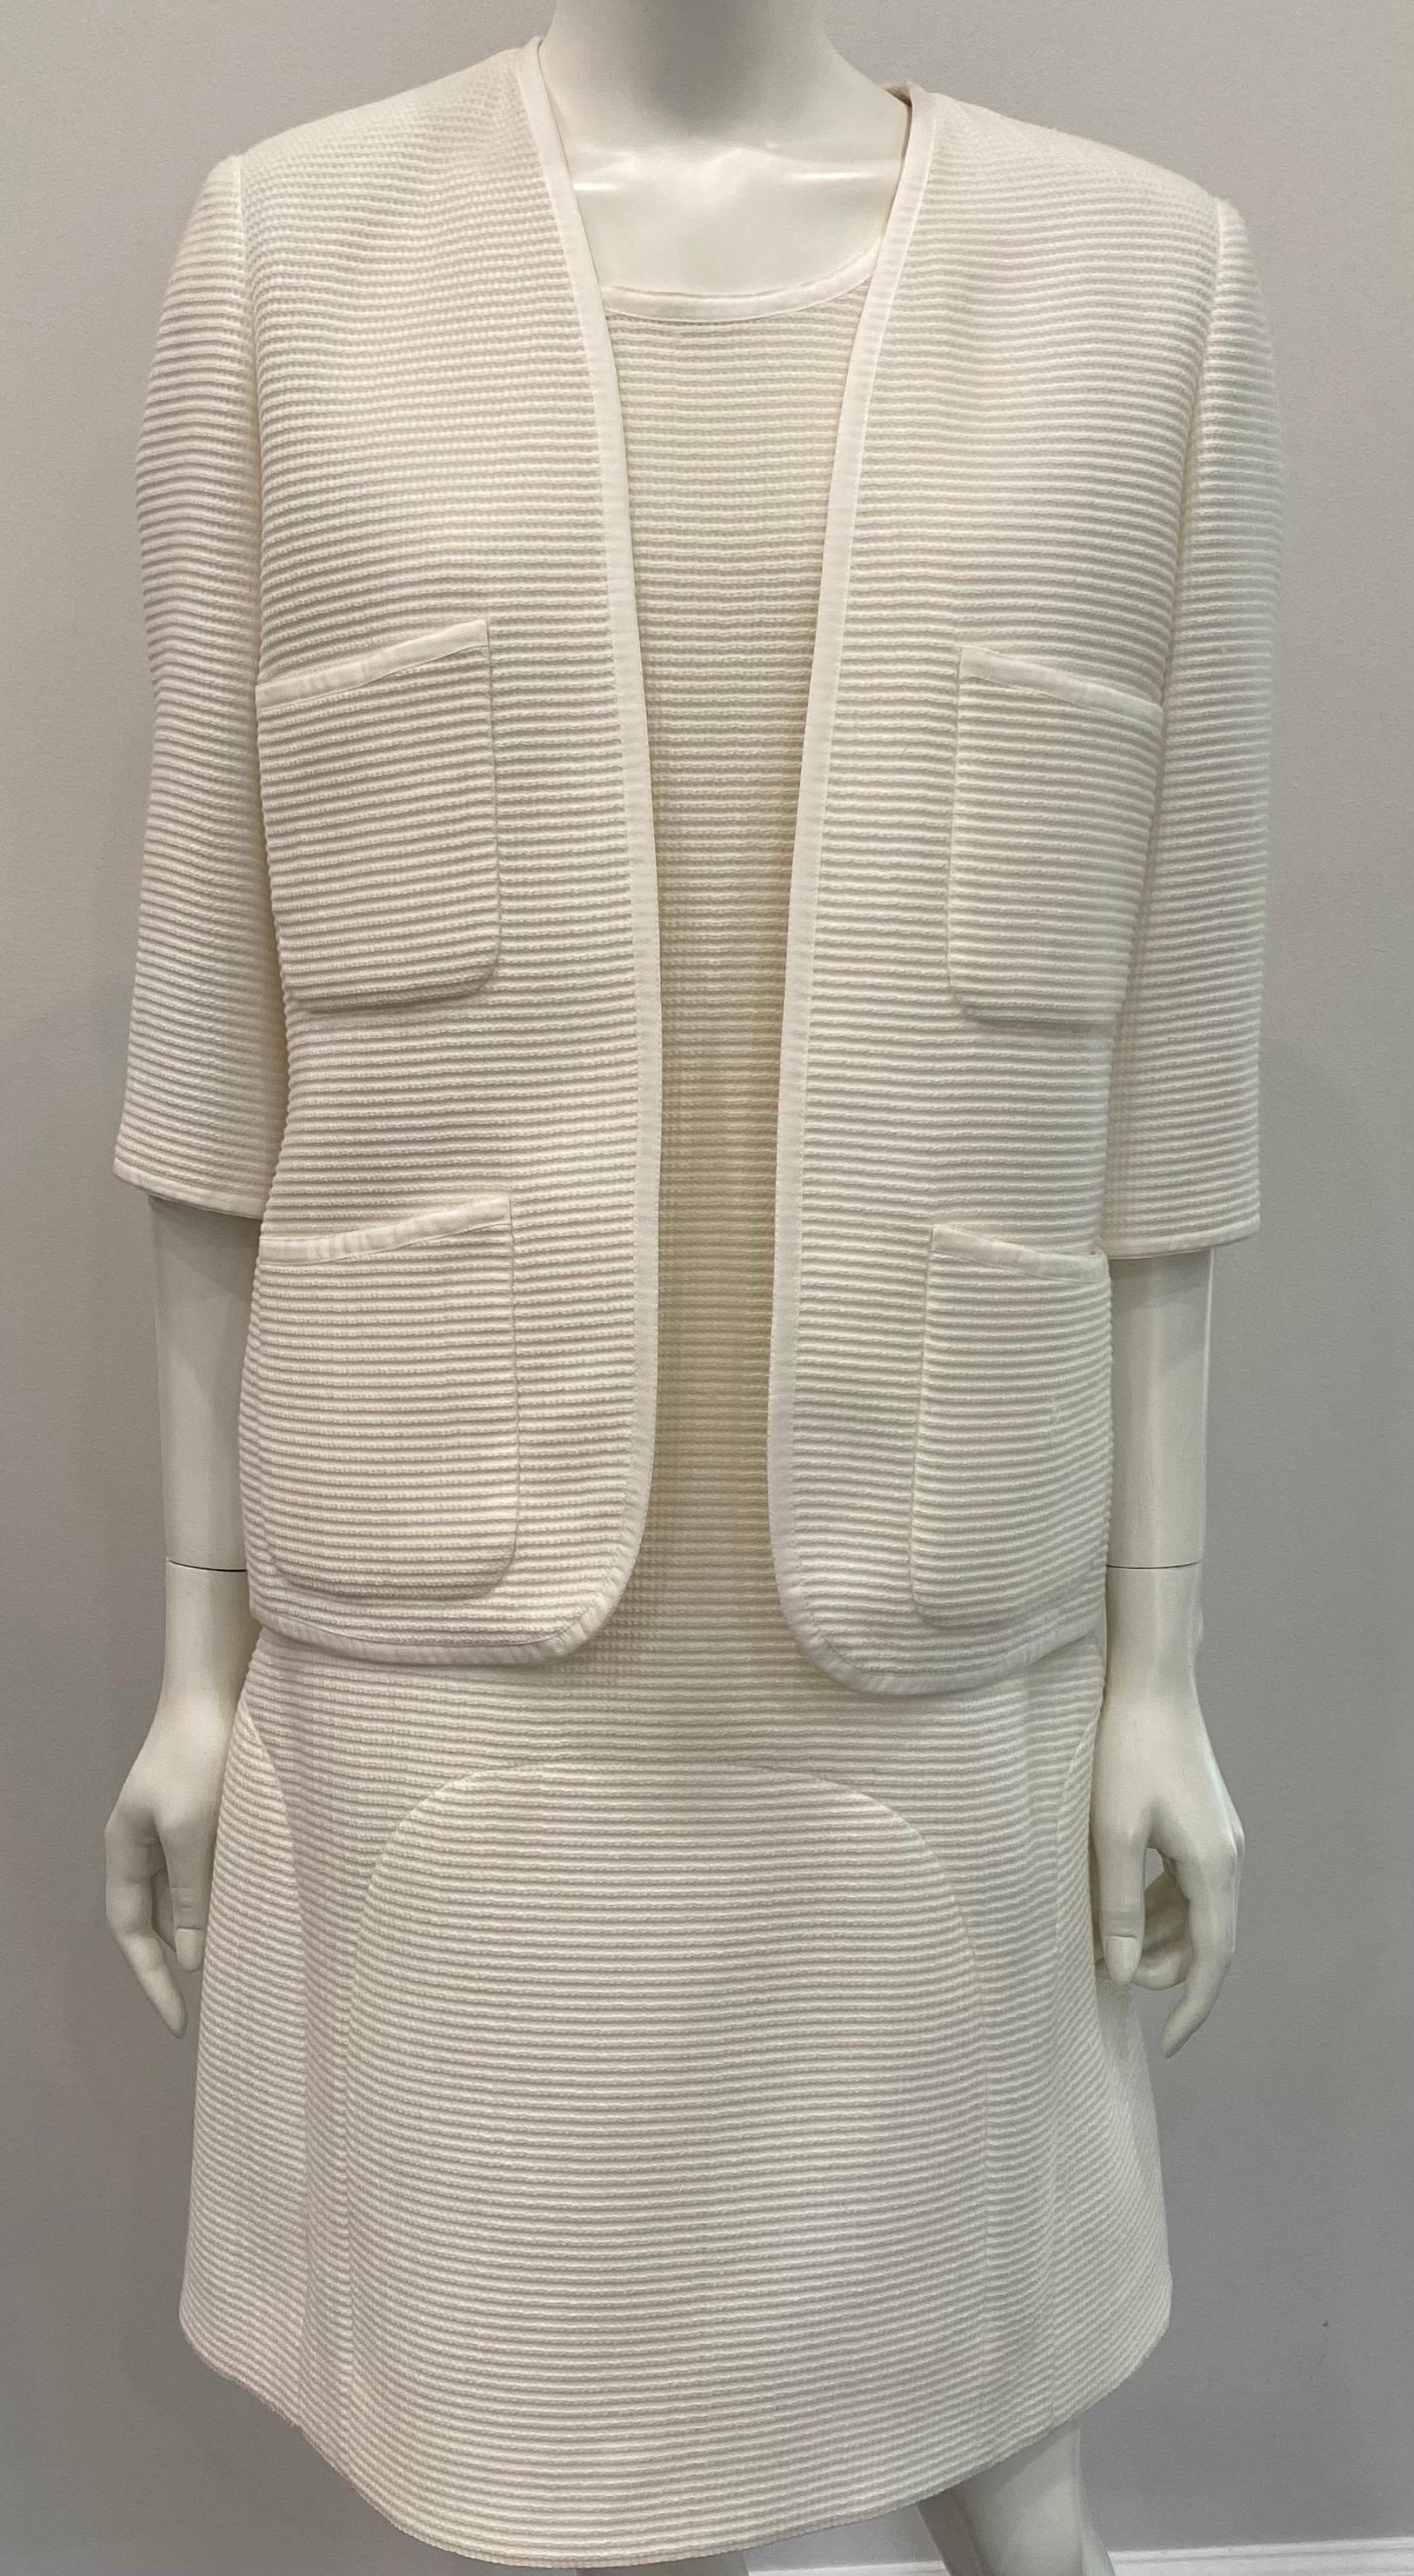 Chanel Ivory Ribbed Cotton Sleeveless Sheath Dress with Jacket - Sz 42. This two piece ensemble is a very elegant, simple and versatile creation as you can mix these items with others in your wardrobe. Both cotton ribbed pieces are fully lined in a